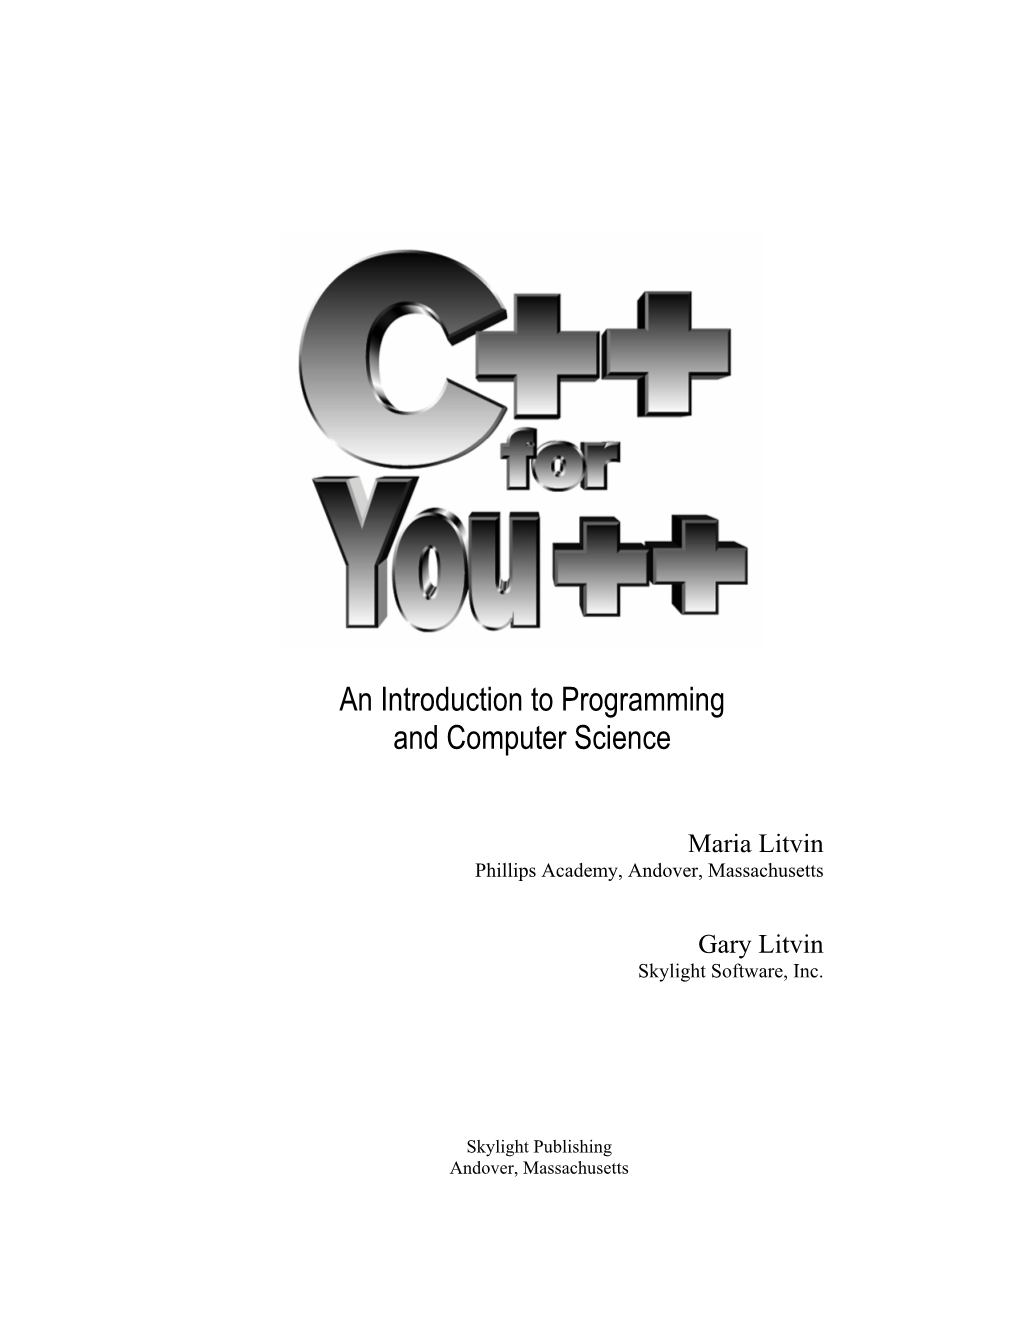 C++ for You++, AP Edition, by Maria Litvin and Gary Litvin Is Licensed Under a Creative Commons Attribution-Noncommercial-Sharealike 3.0 Unported License